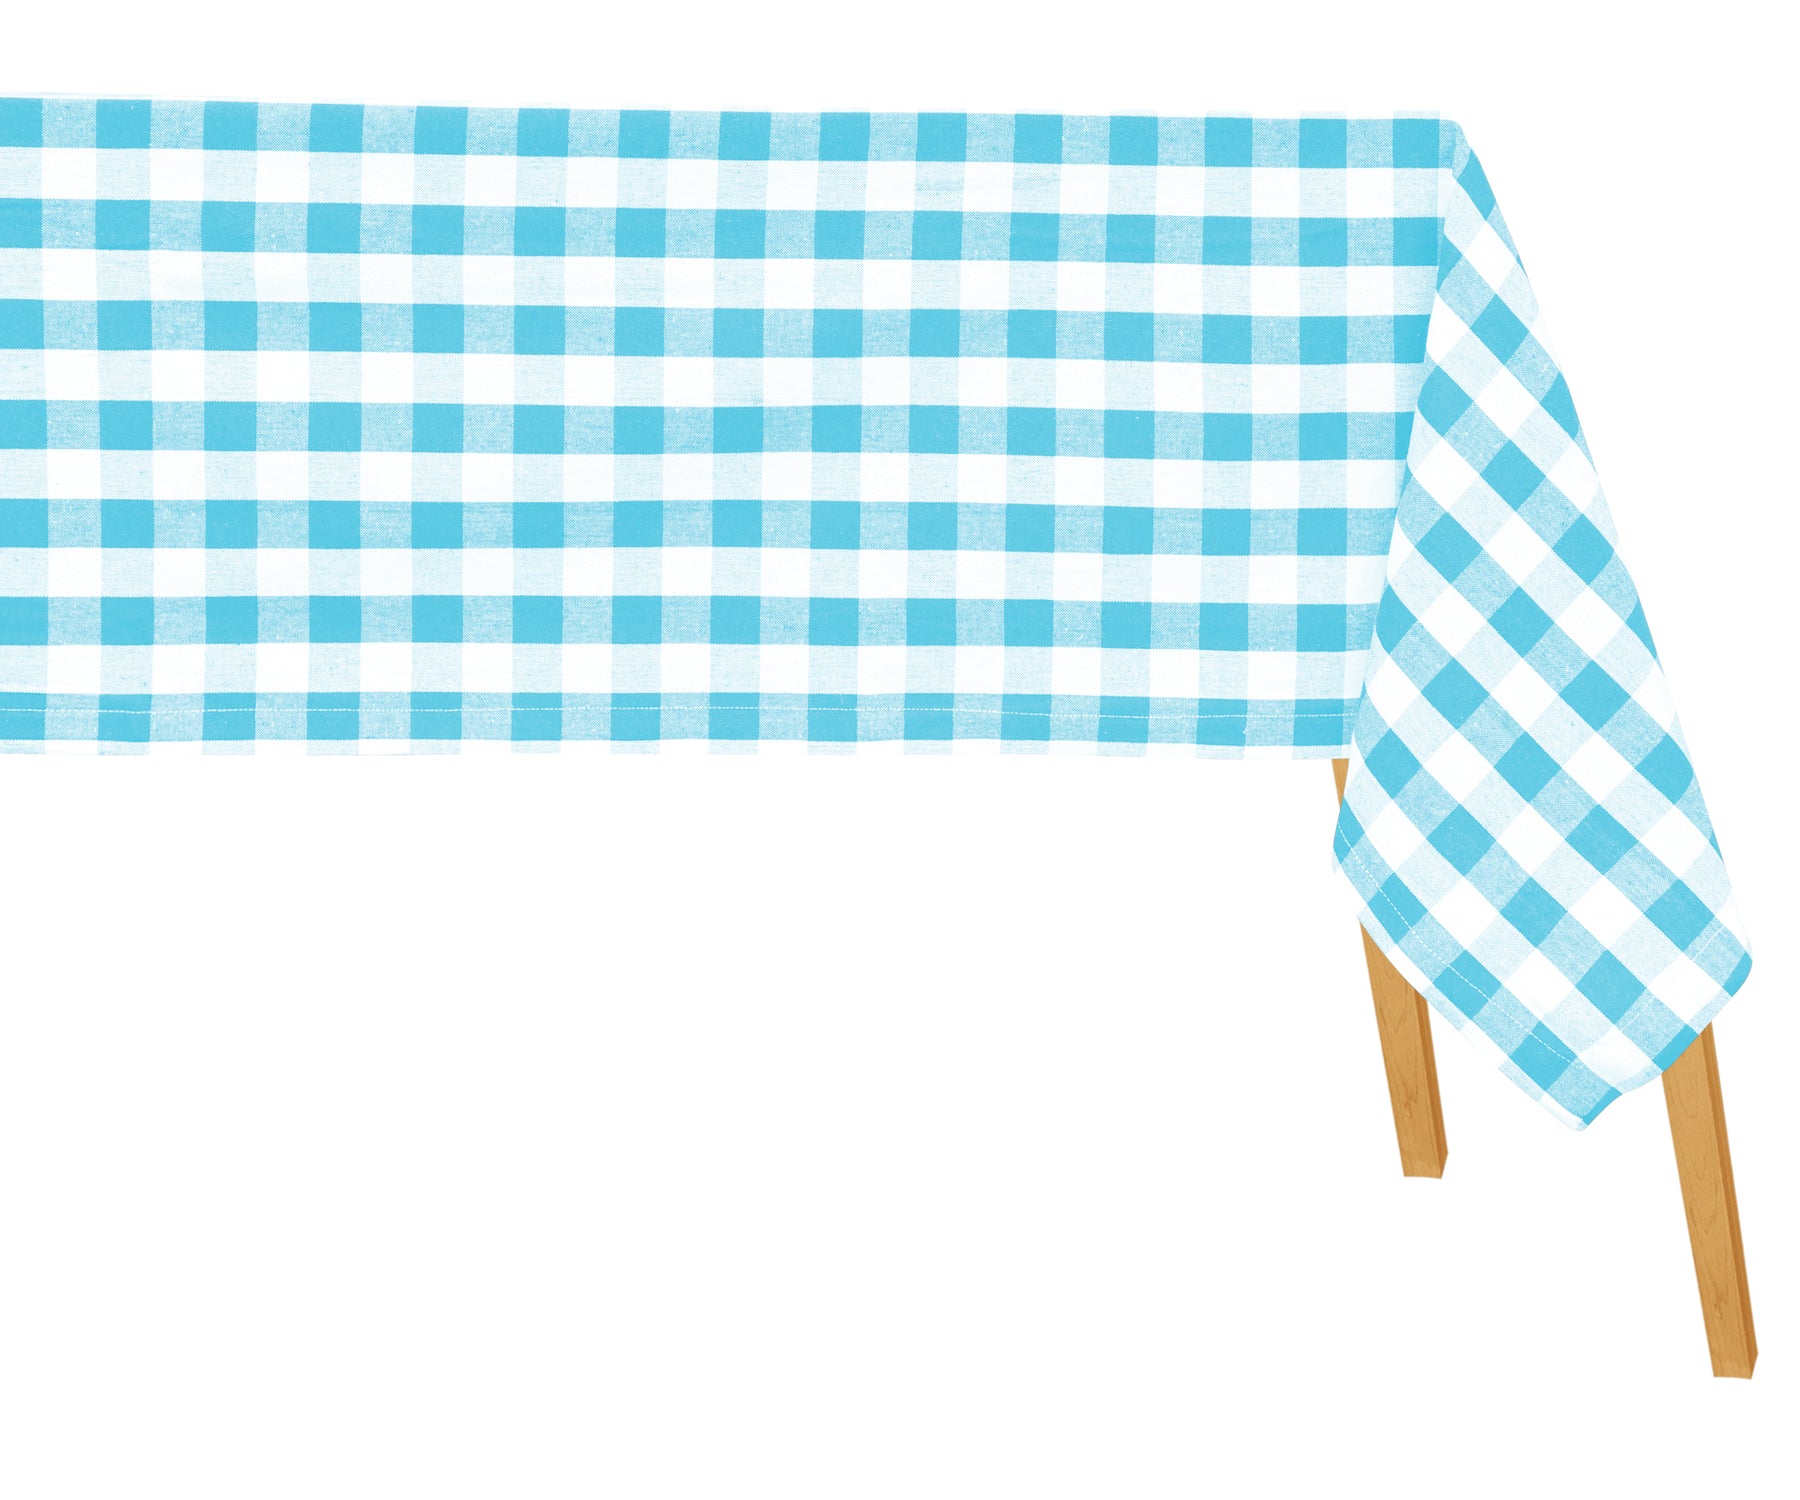 Checkered Tablecloth for a traditional look and feel.